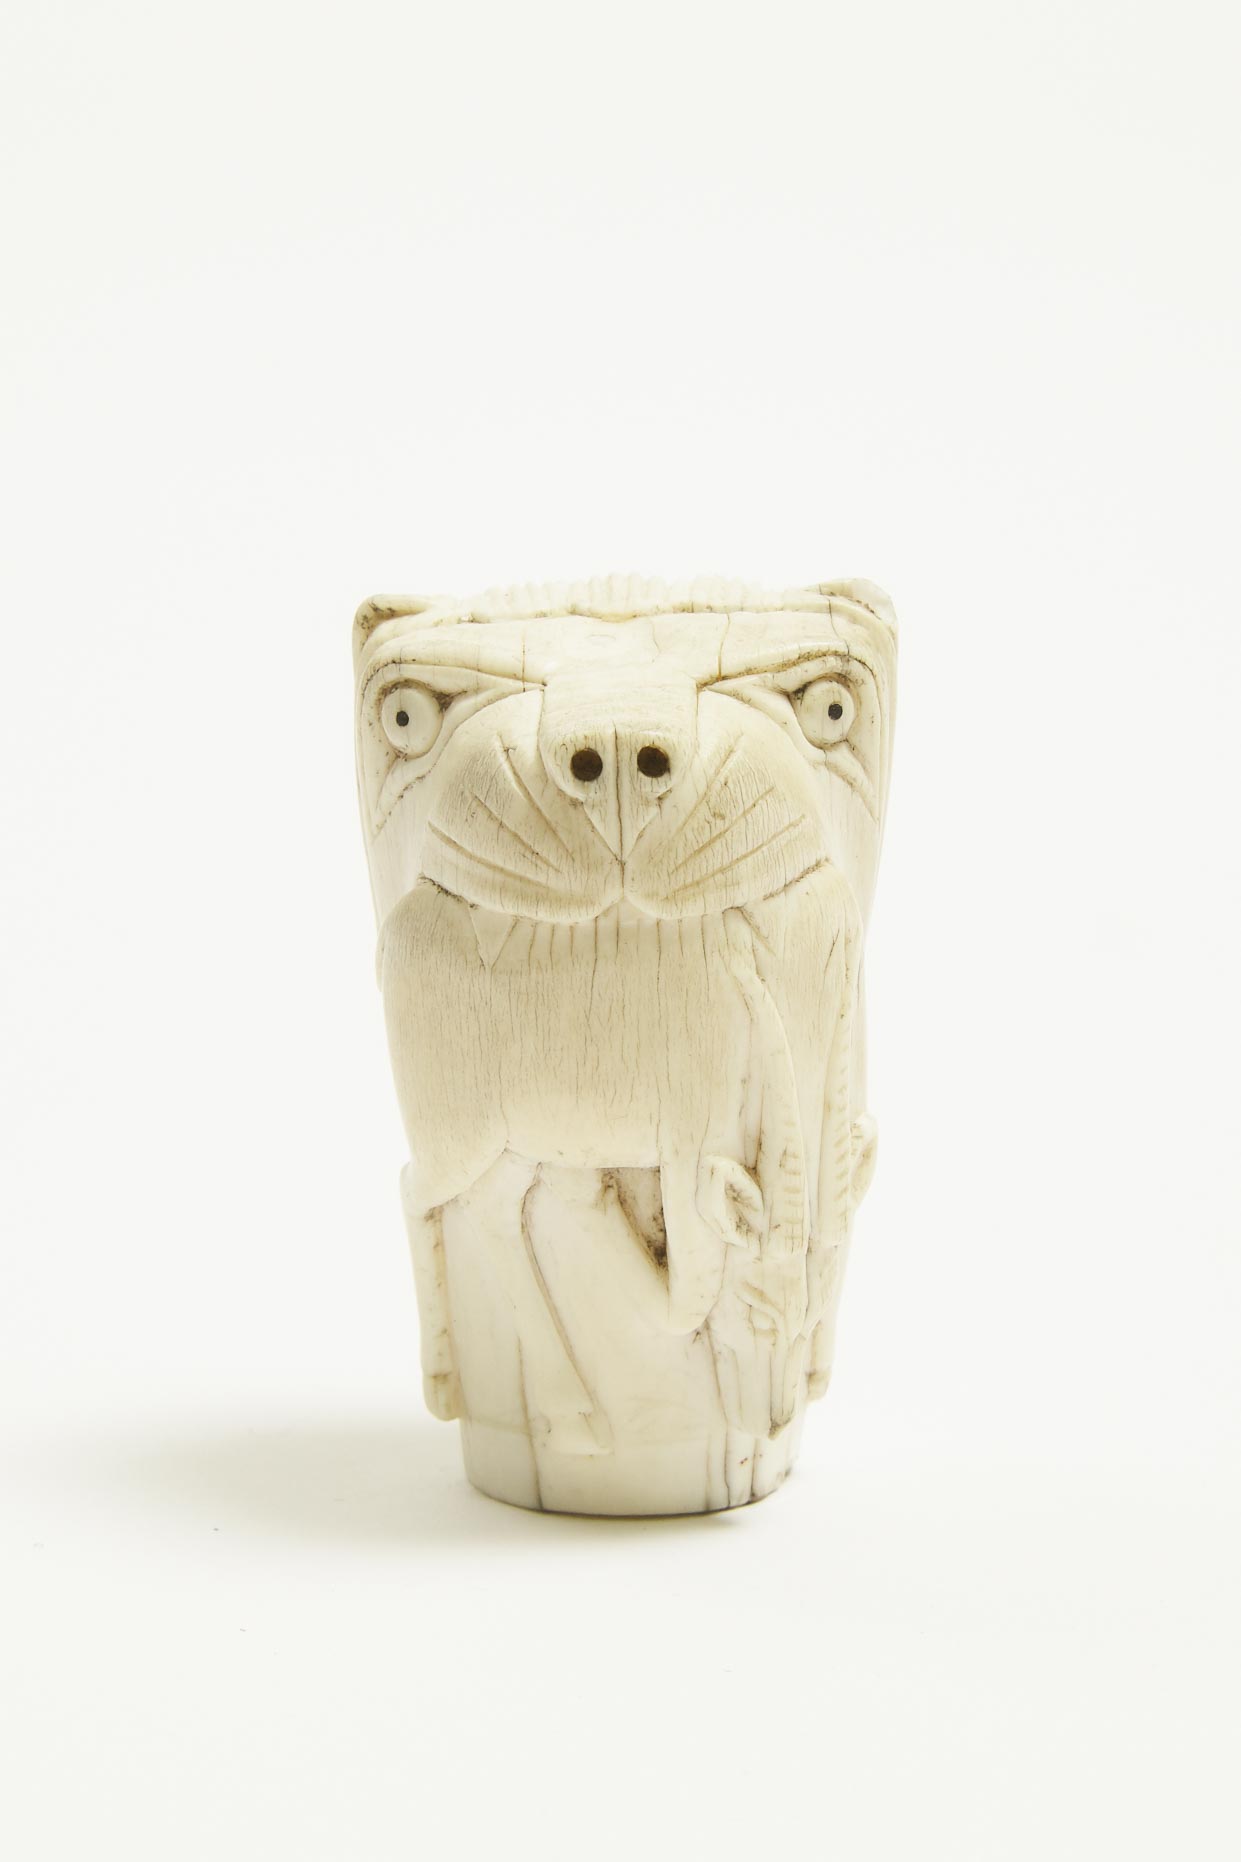 African Carved Ivory Walking Stick/Cane Handle, late 19th to early 20th century